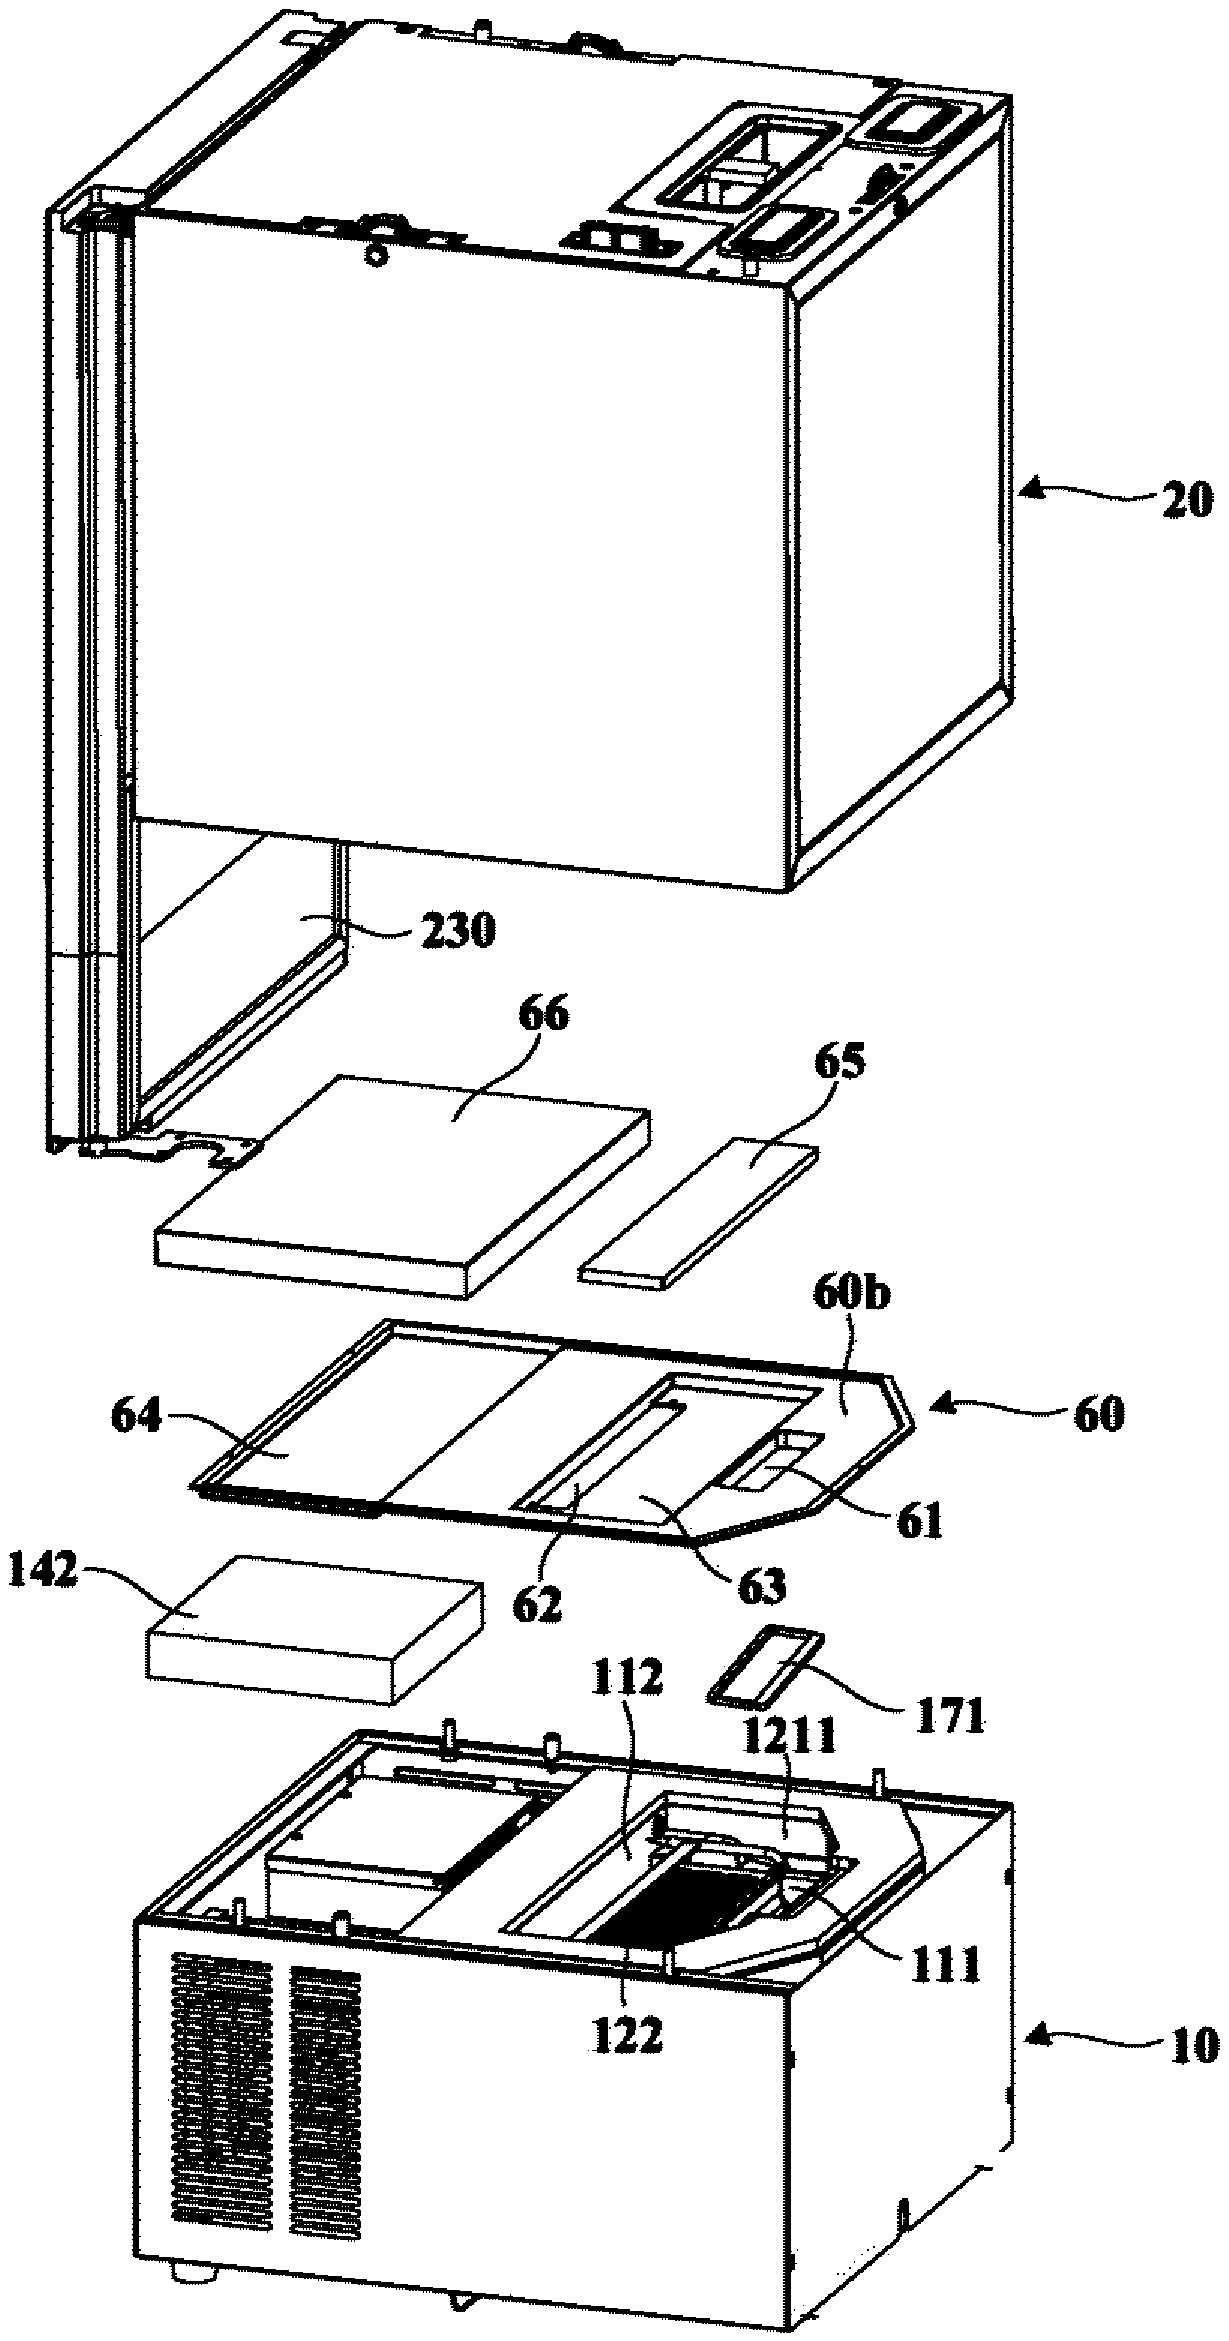 Cold storage and refrigeration device